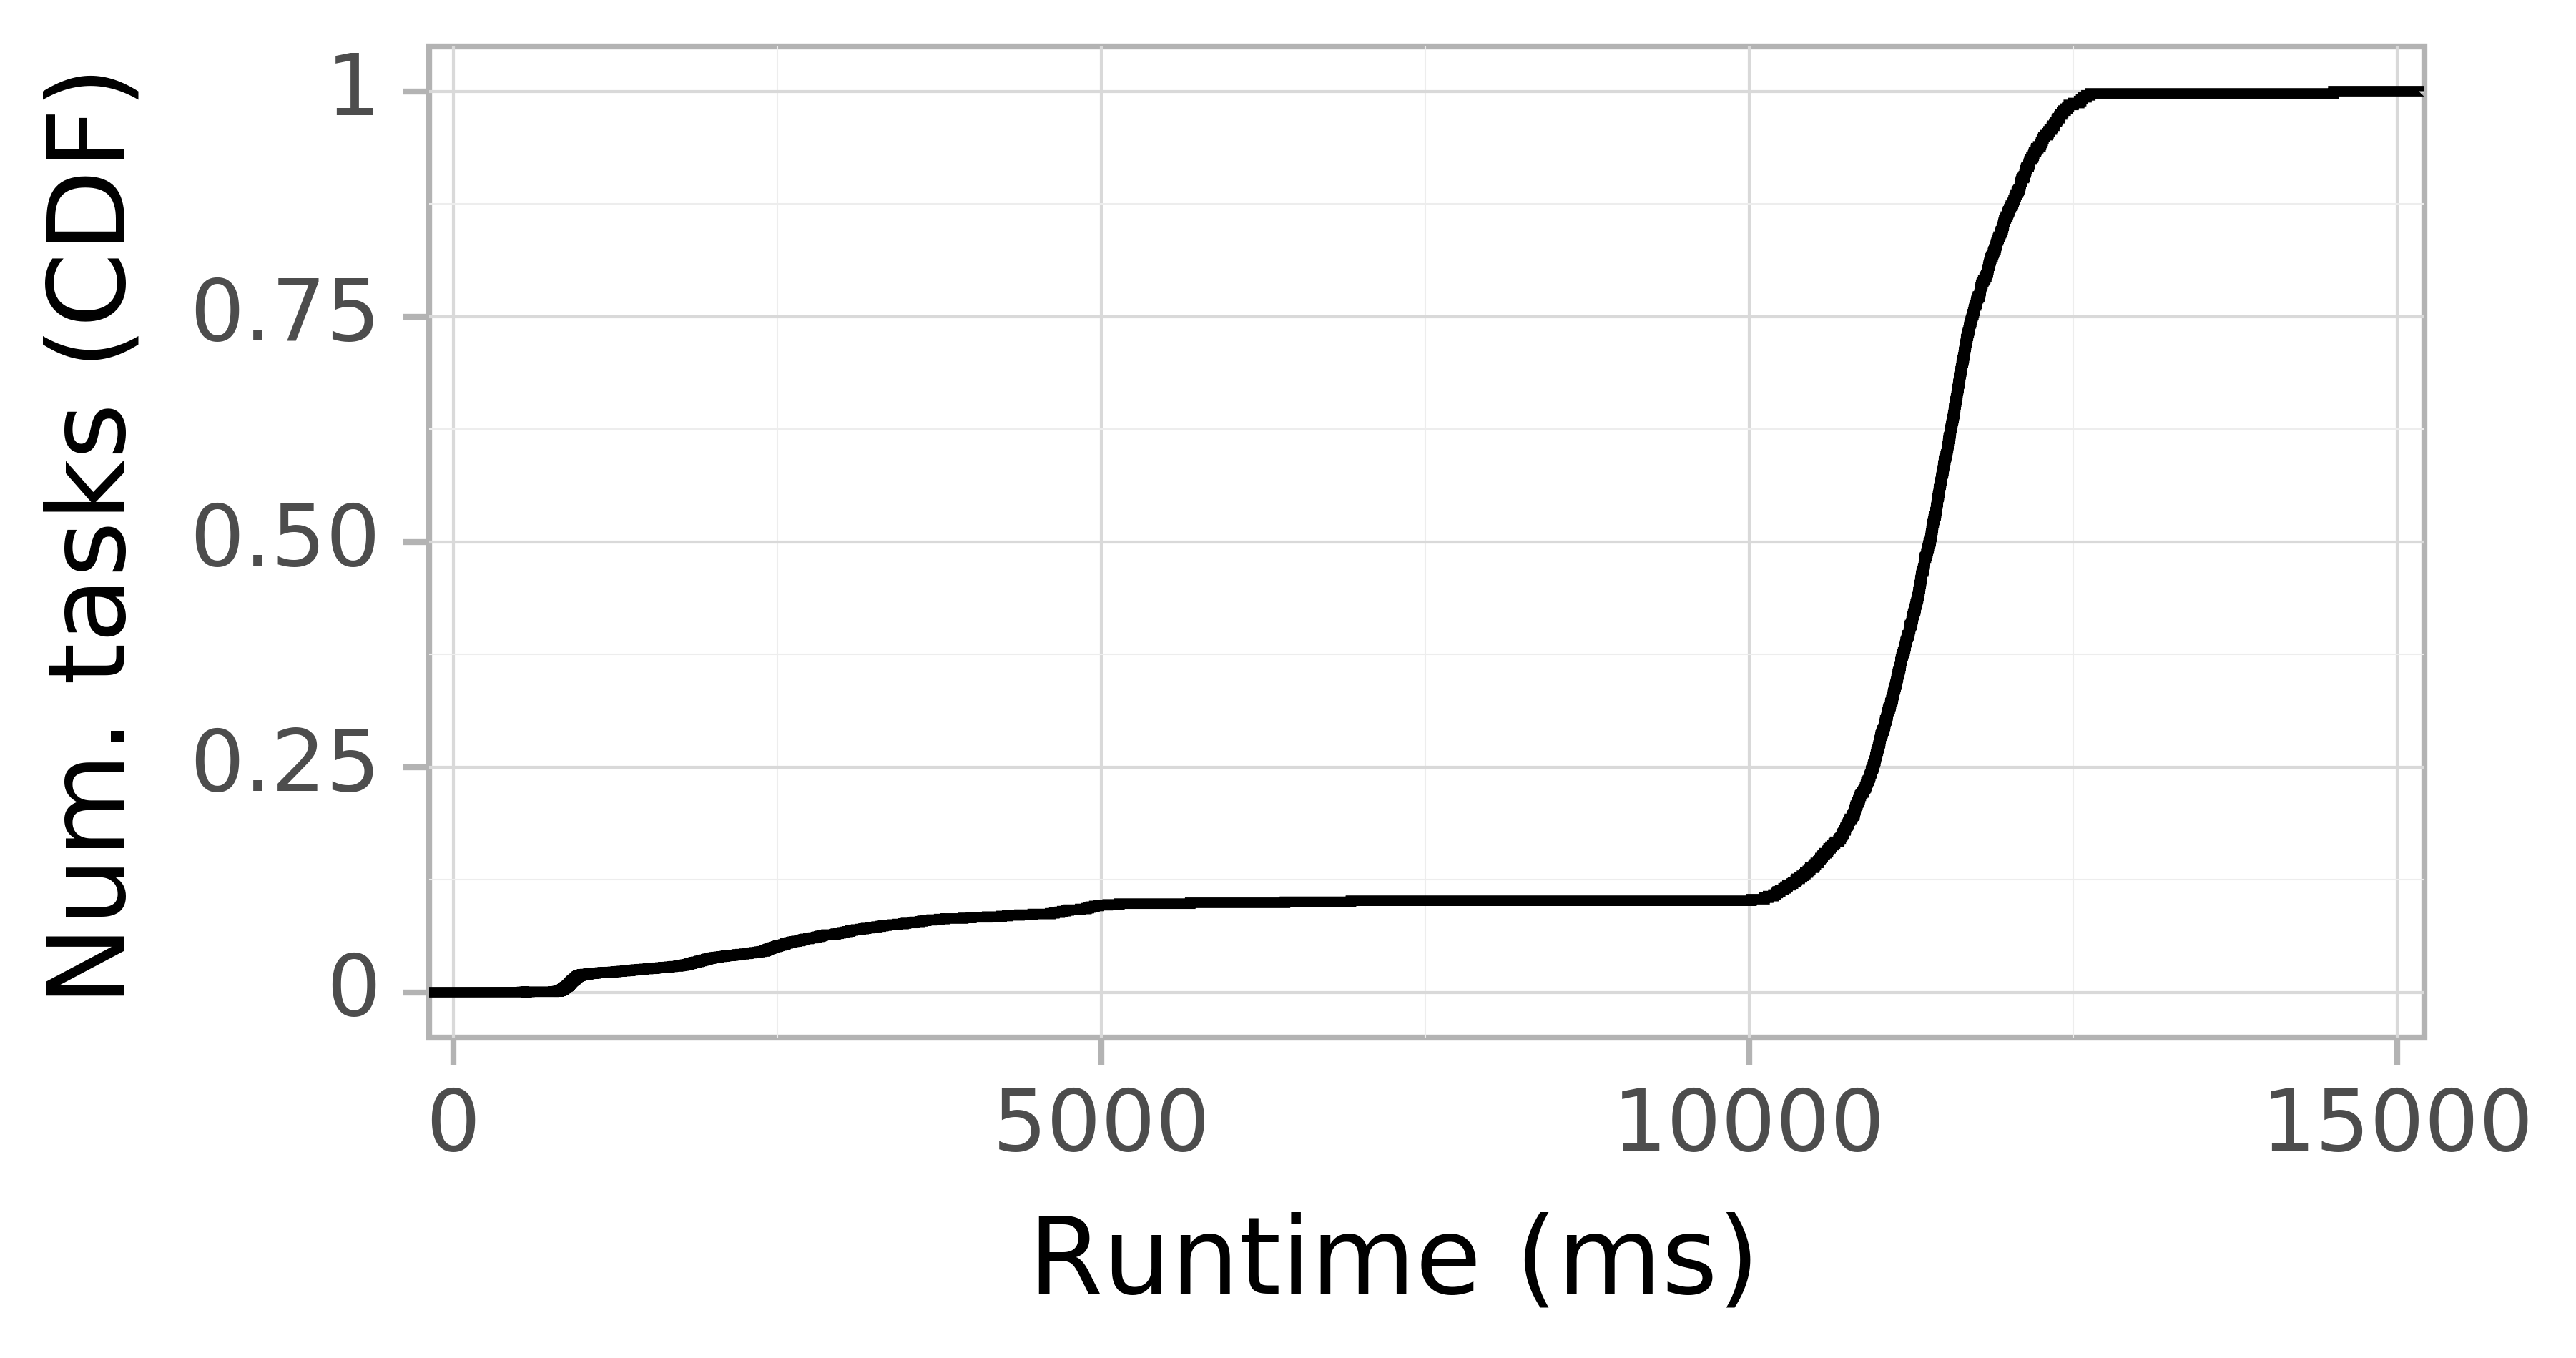 Task runtime CDF graph for the askalon-new_ee54 trace.